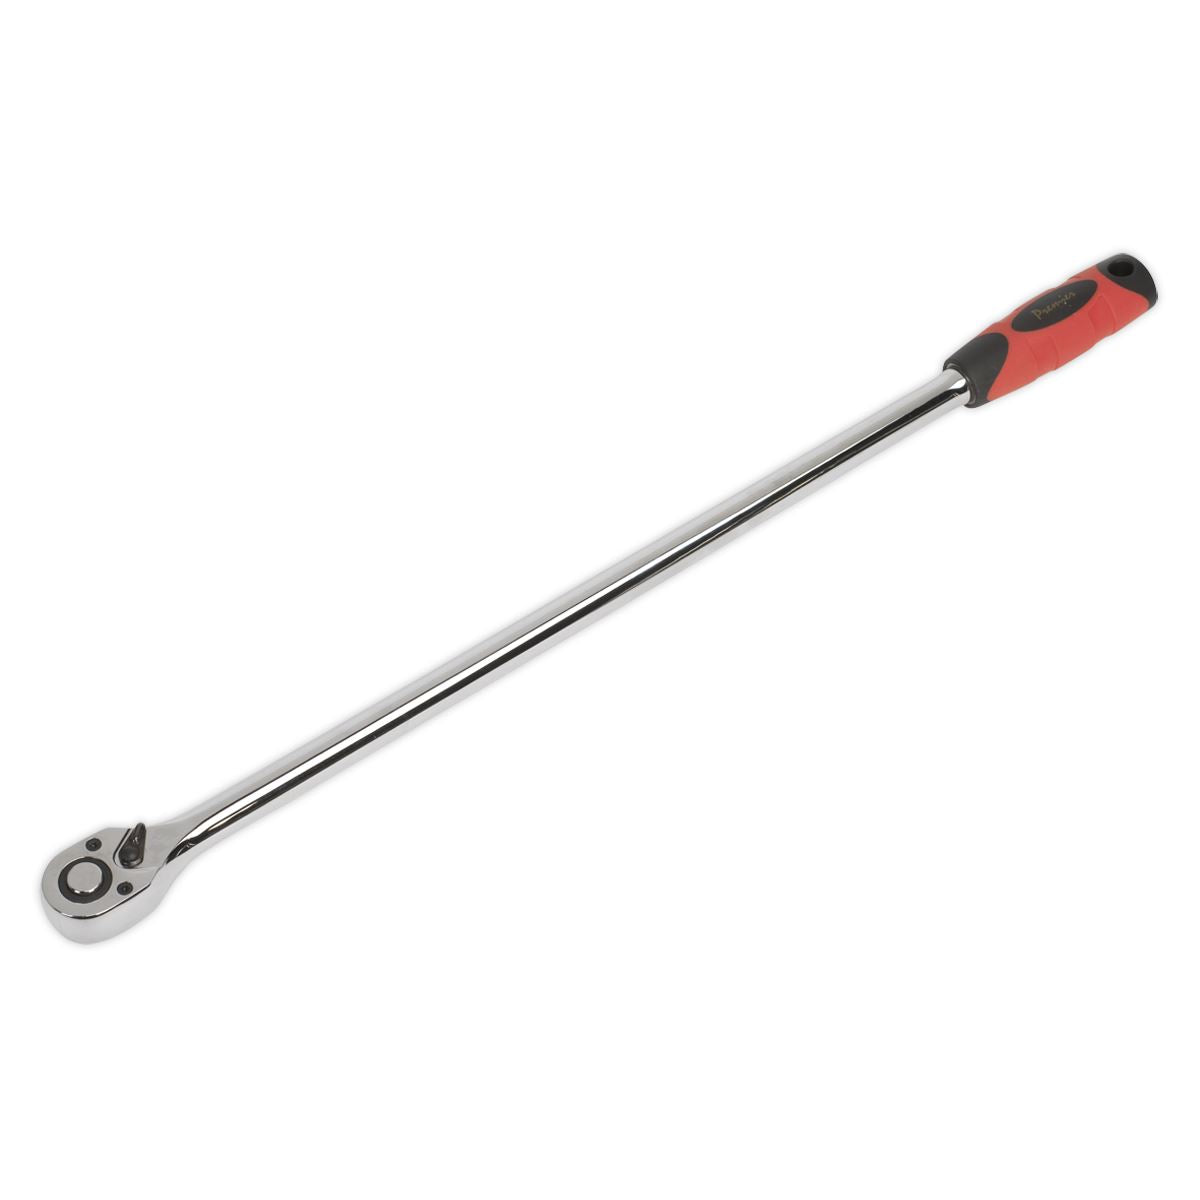 Sealey Premier Ratchet Wrench Extra-Long 600mm 1/2"Sq Drive